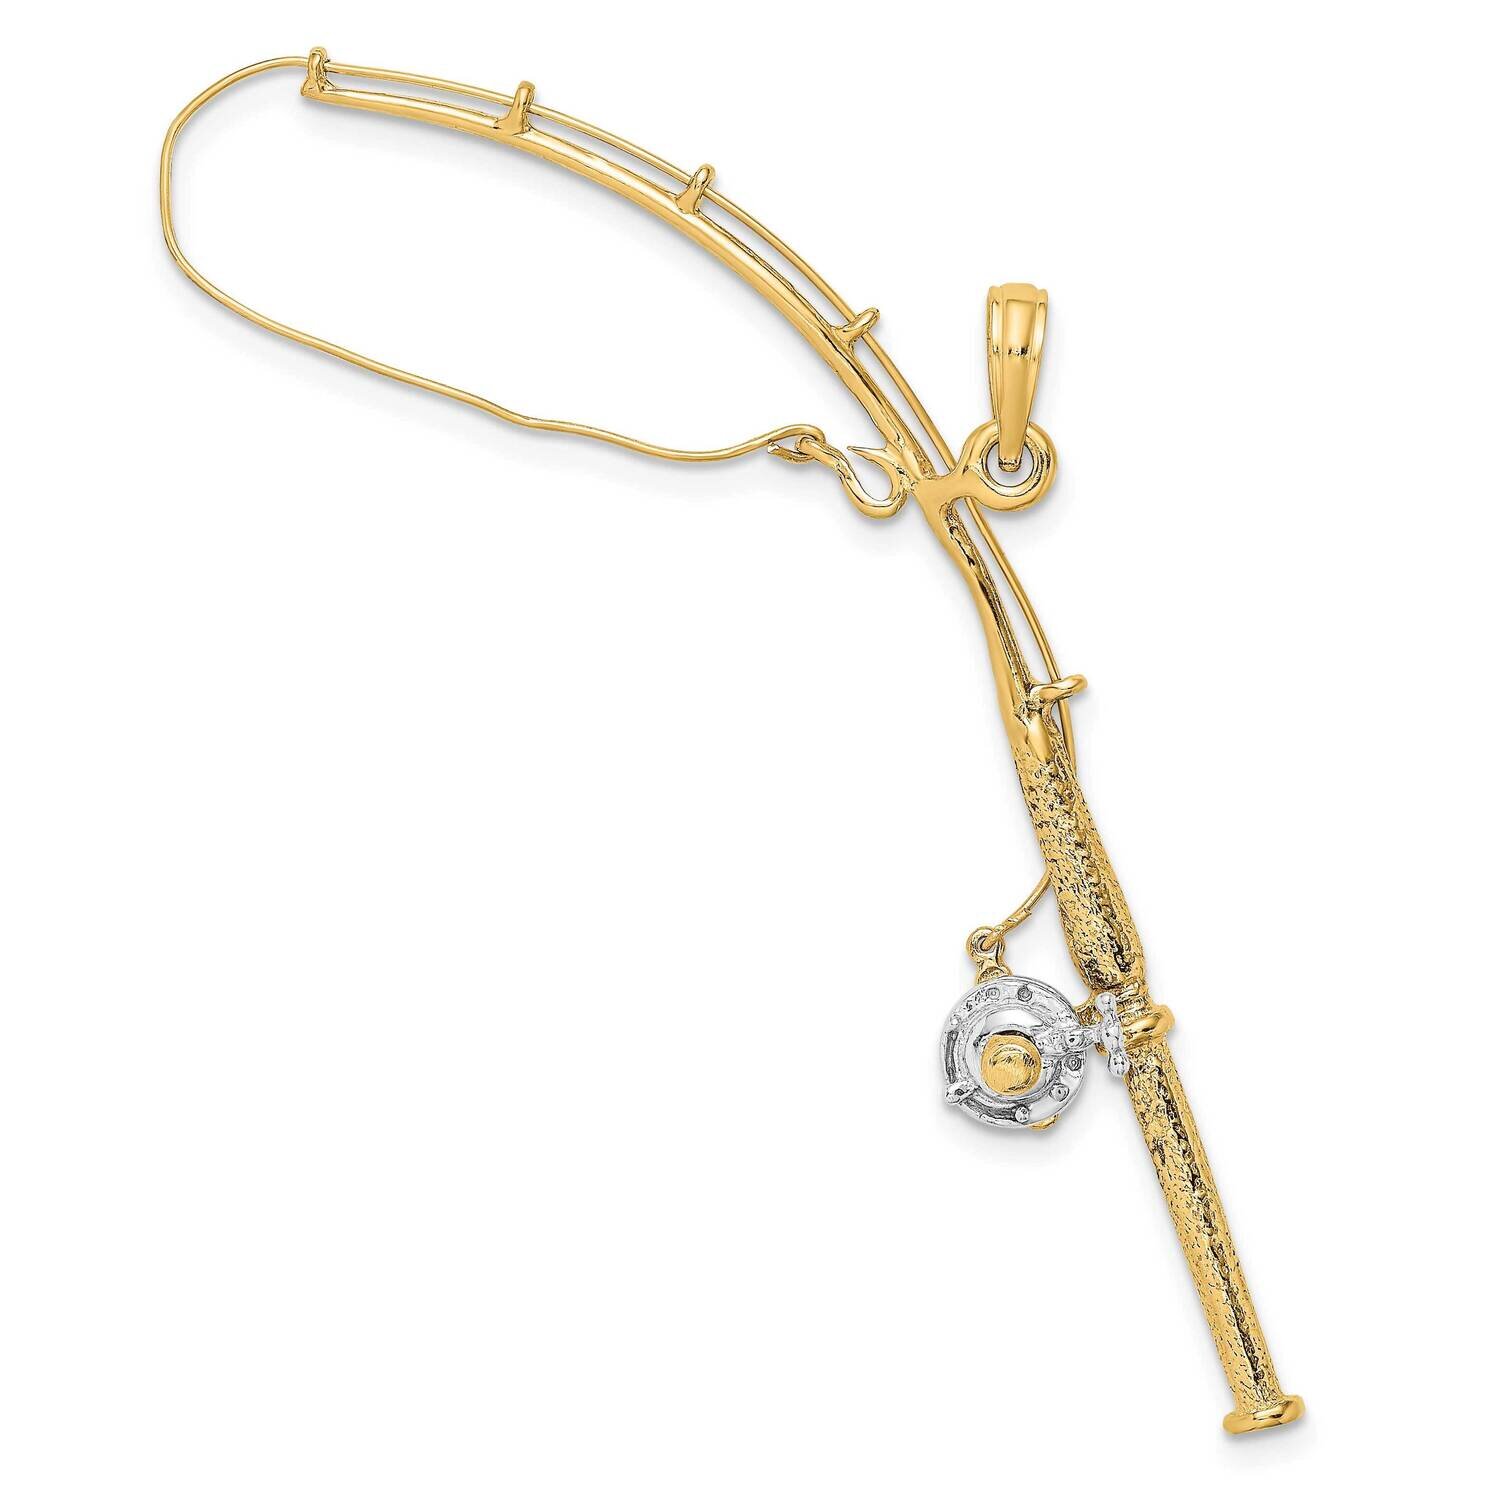 3-D Moveable Fishing Pole with Reel Charm 14k Gold Rhodium K9051